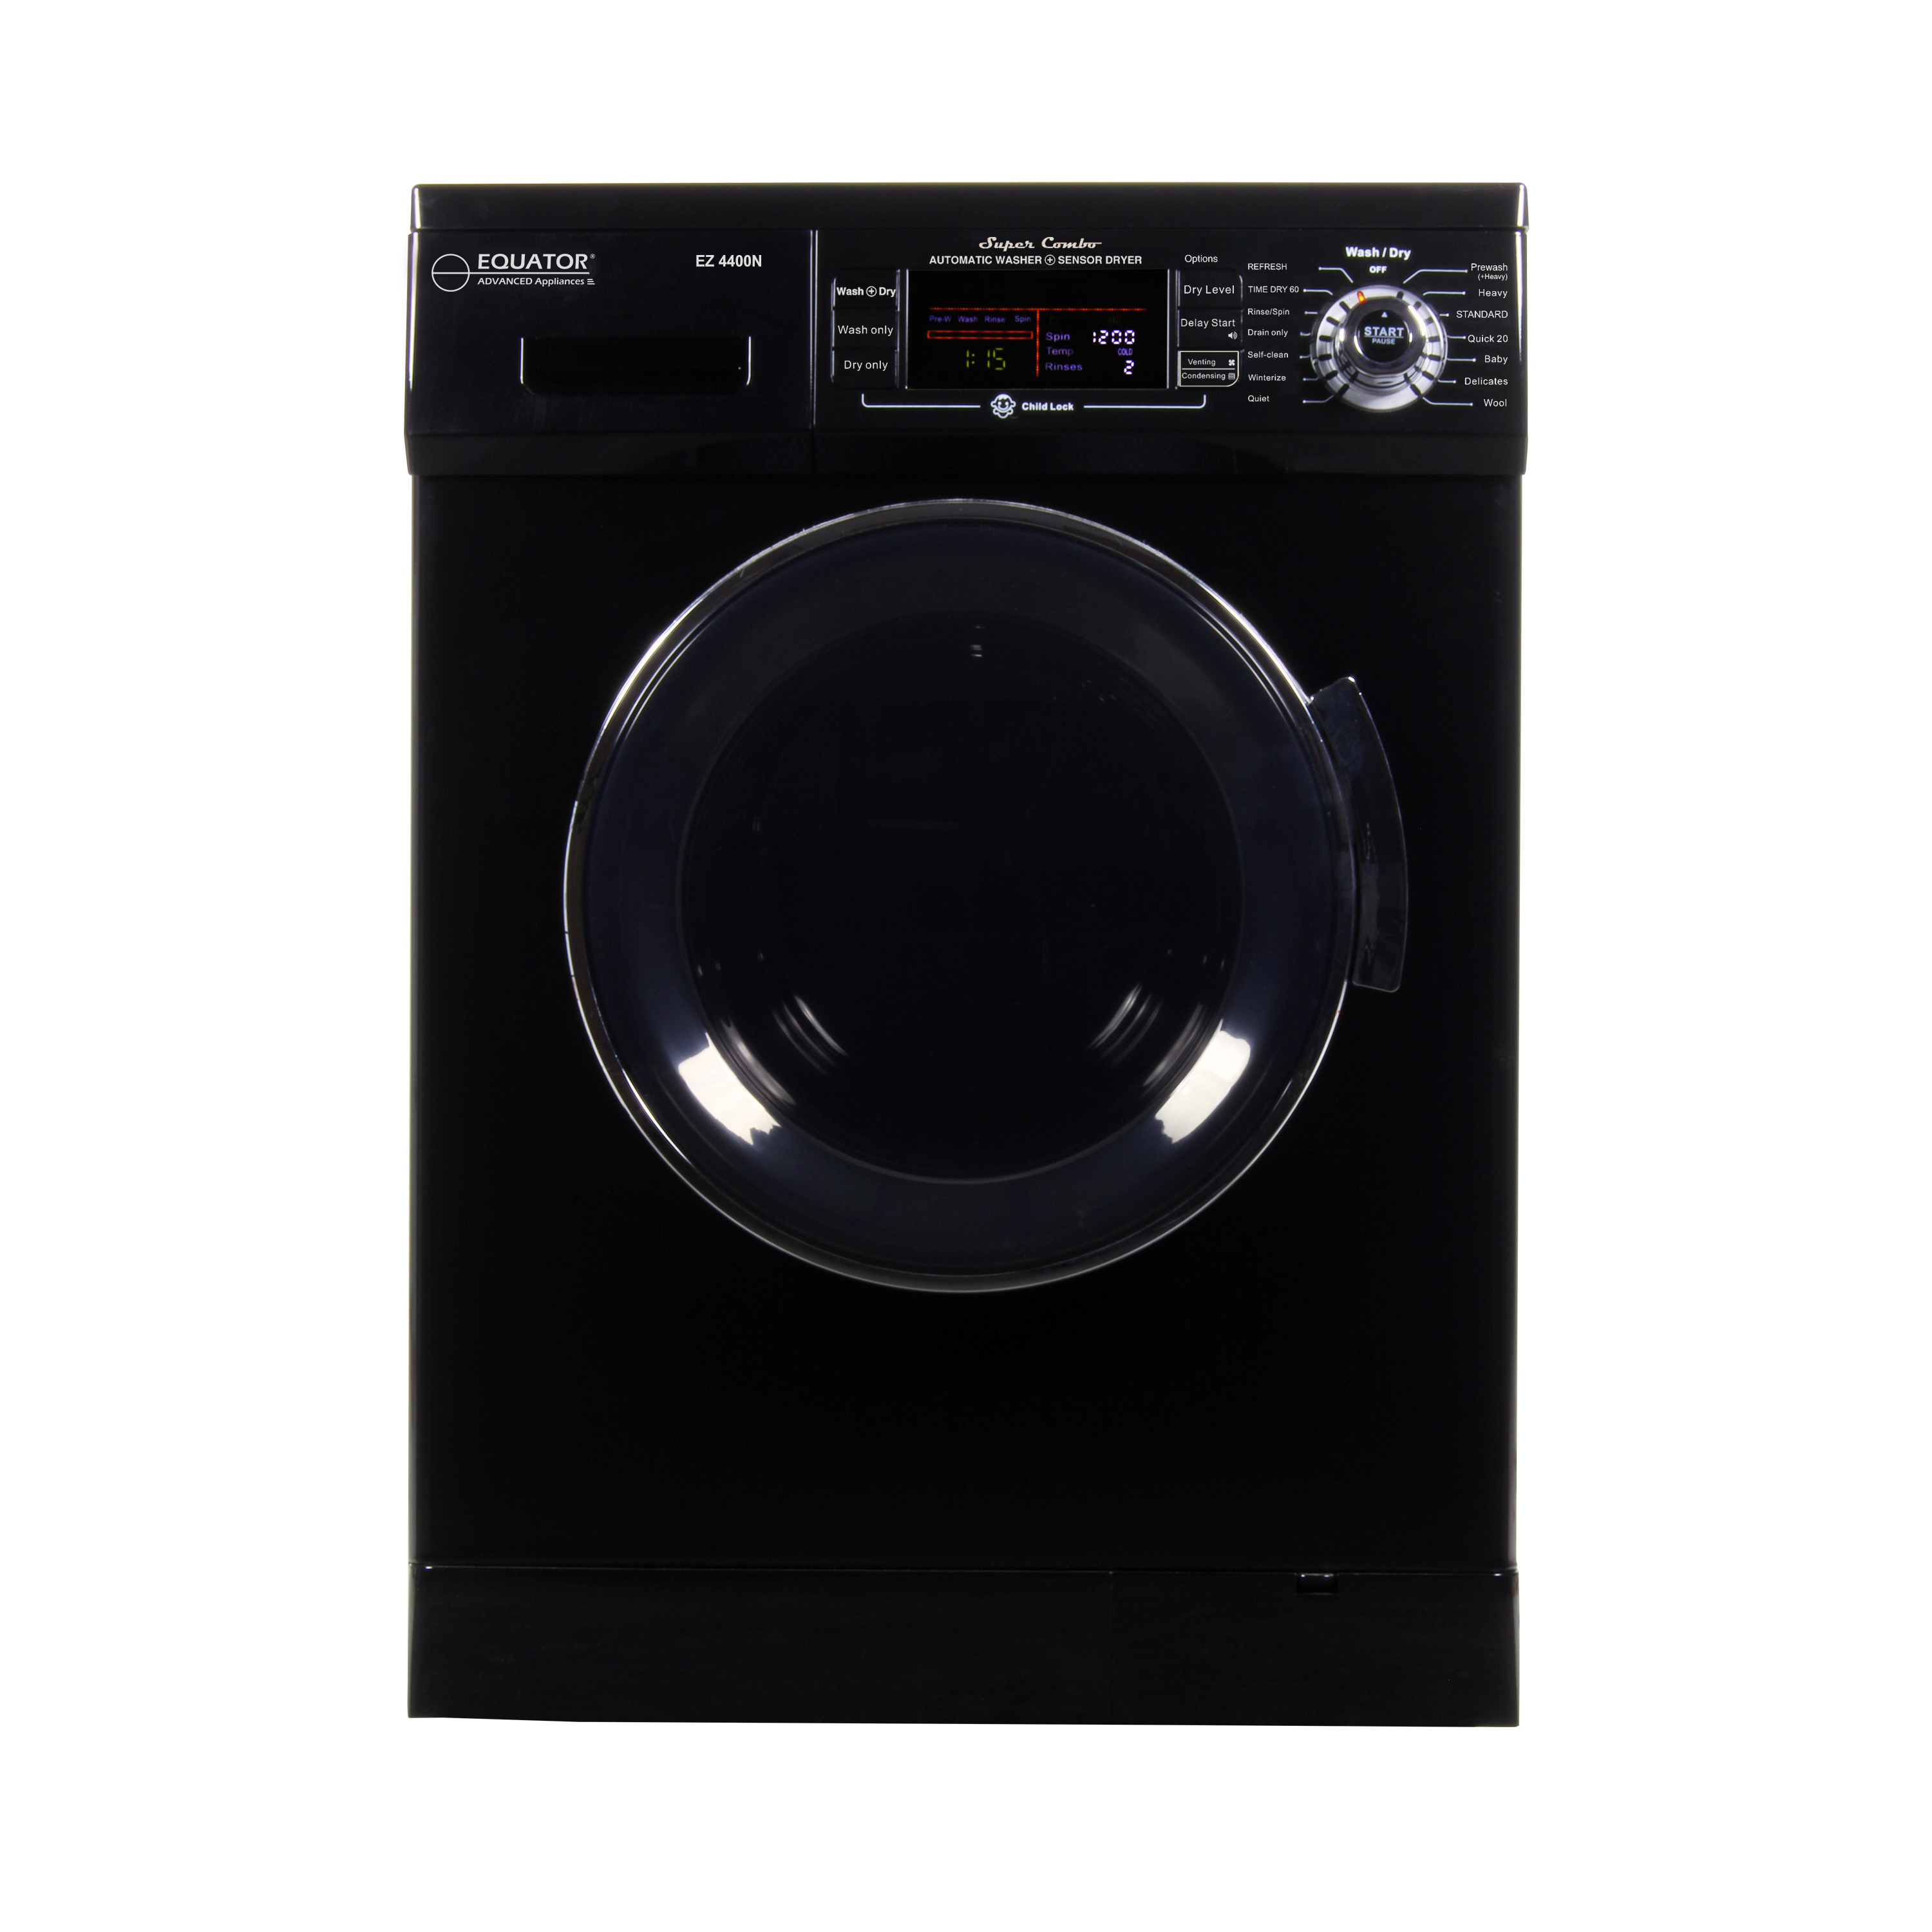 Equator Compact 13 lbs Combination Washer DryerVented/Ventless Dry, Winterize, Quiet, Easy to Use Controls, 2020 (Black)